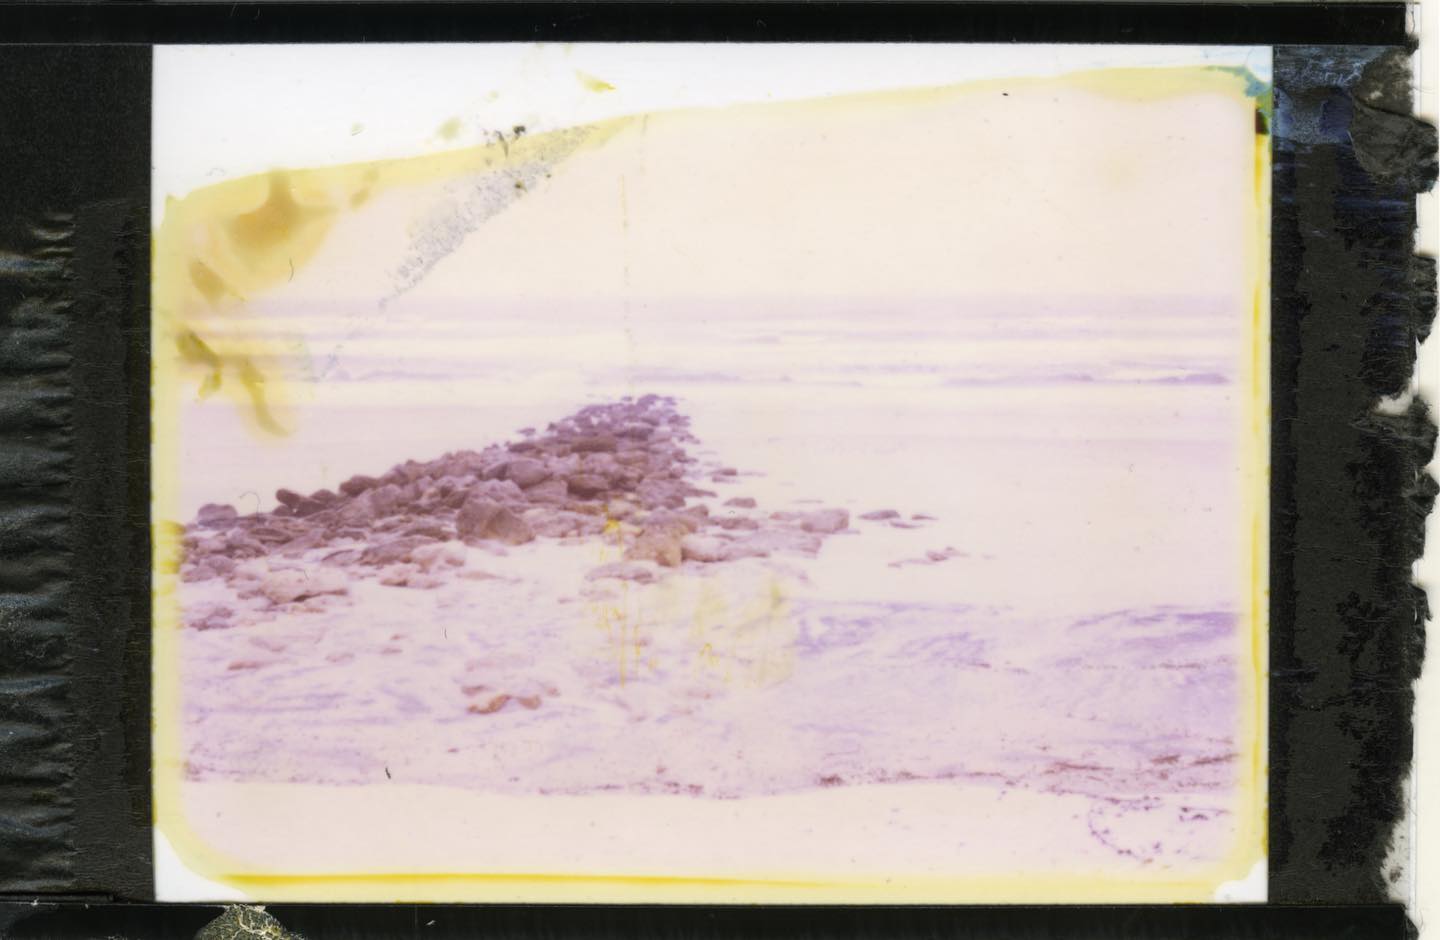 Jetty

@supersense #oneinstantfilm somewhat overexposed. Shot with my #polaroid195 on Marineland, Florida, over the holidays while visiting my mom in St. Augustine. 
#film #filmphotography #filmphotographic #polaroid #savepackfilm